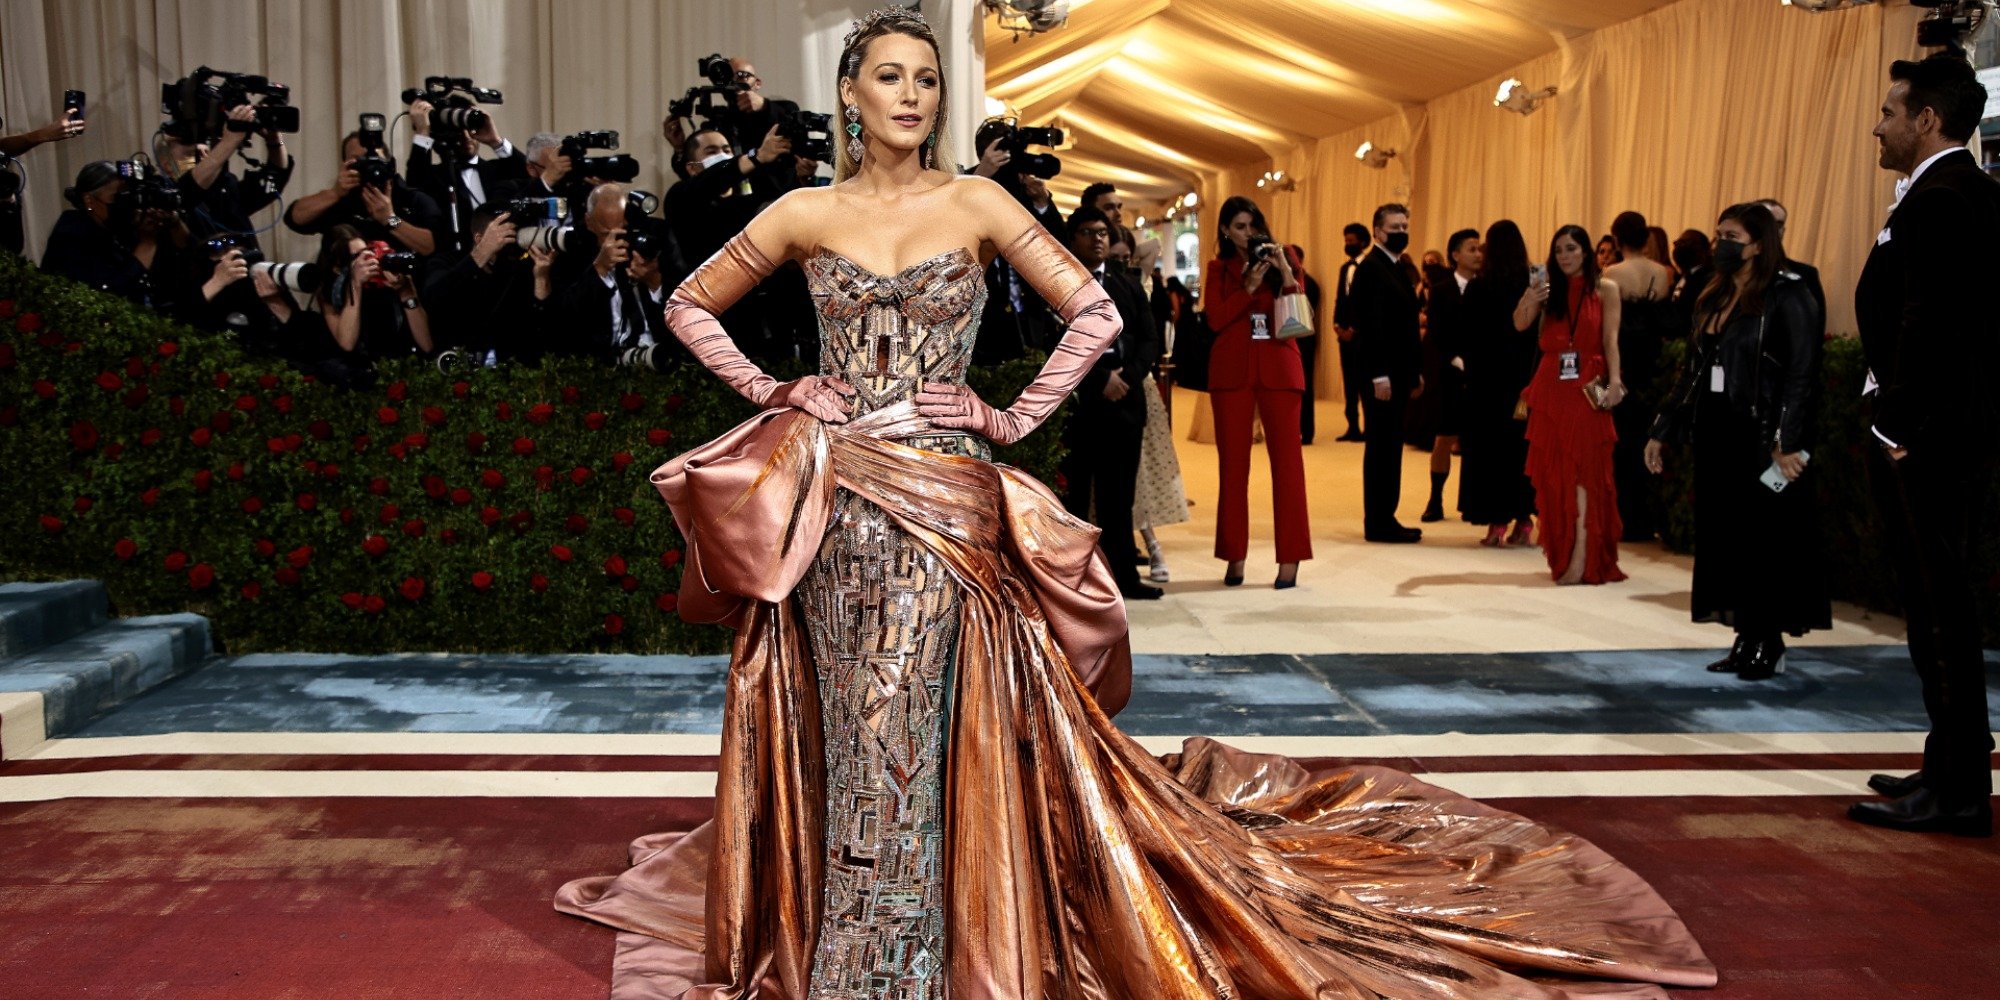 Met Gala latest: Celebrities appear at biggest night in fashion